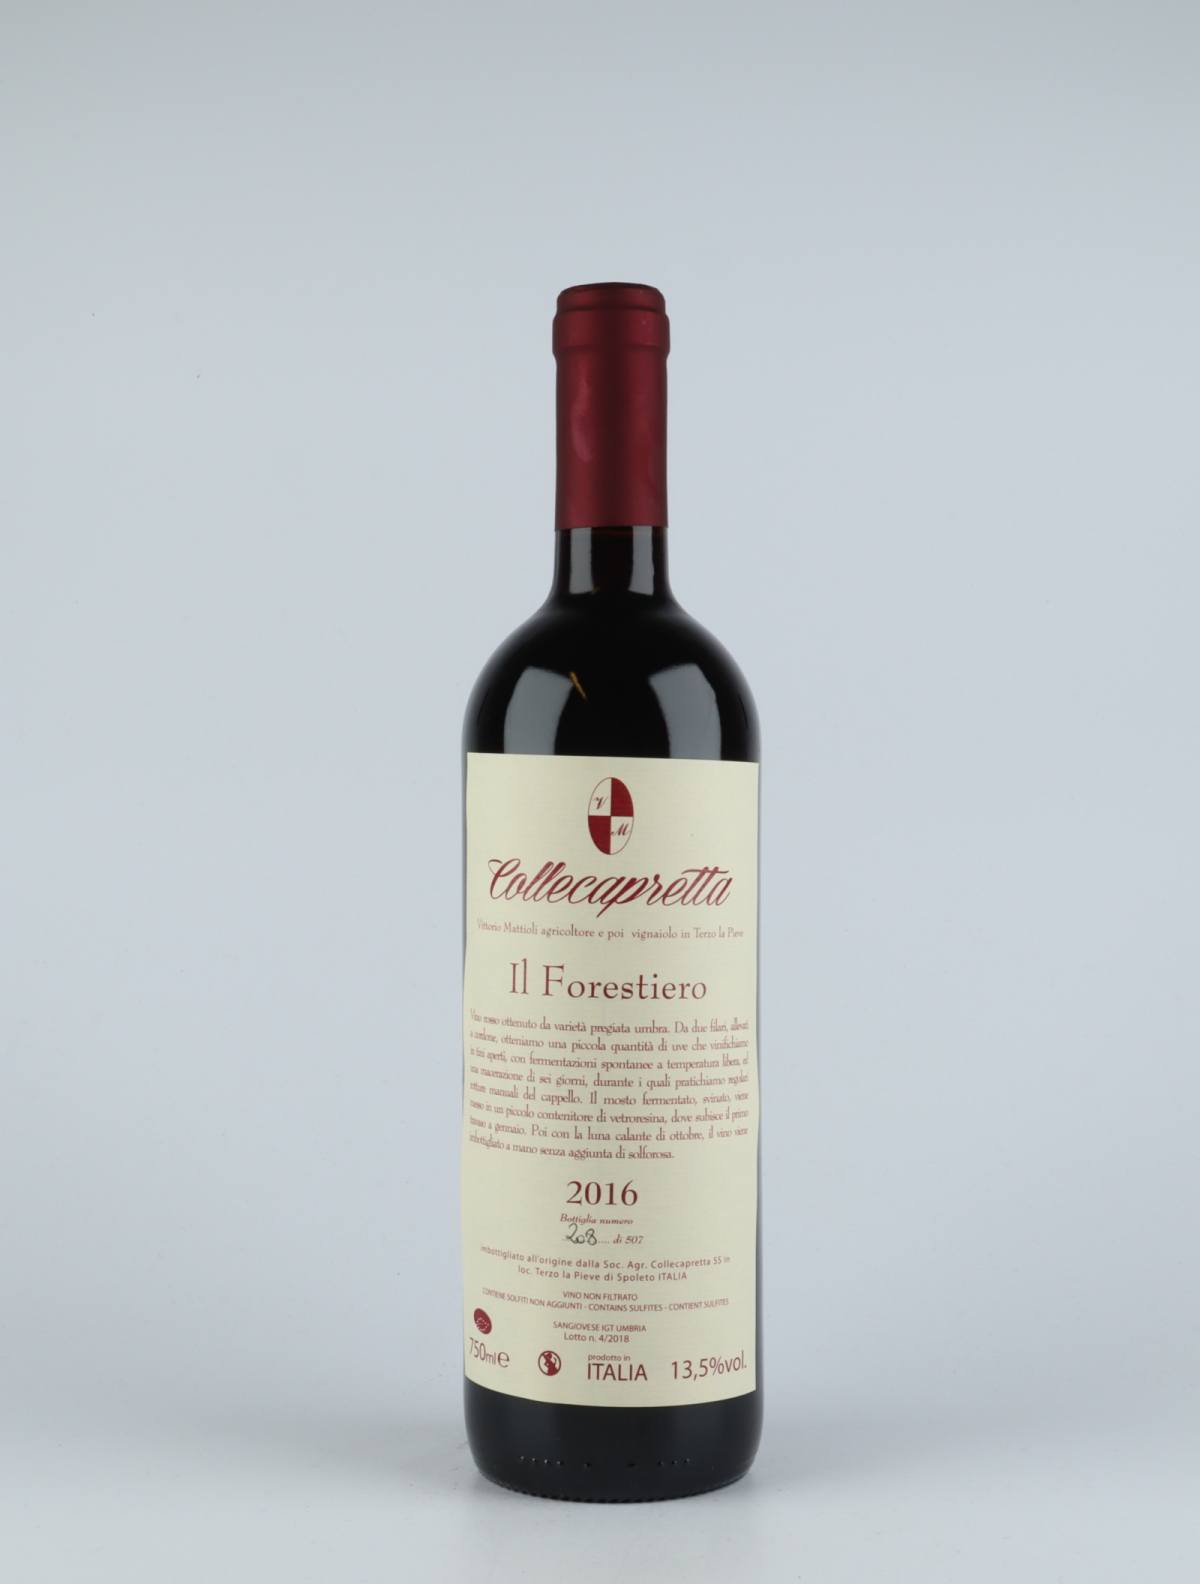 A bottle 2016 Forestiero Red wine from Collecapretta, Umbria in Italy